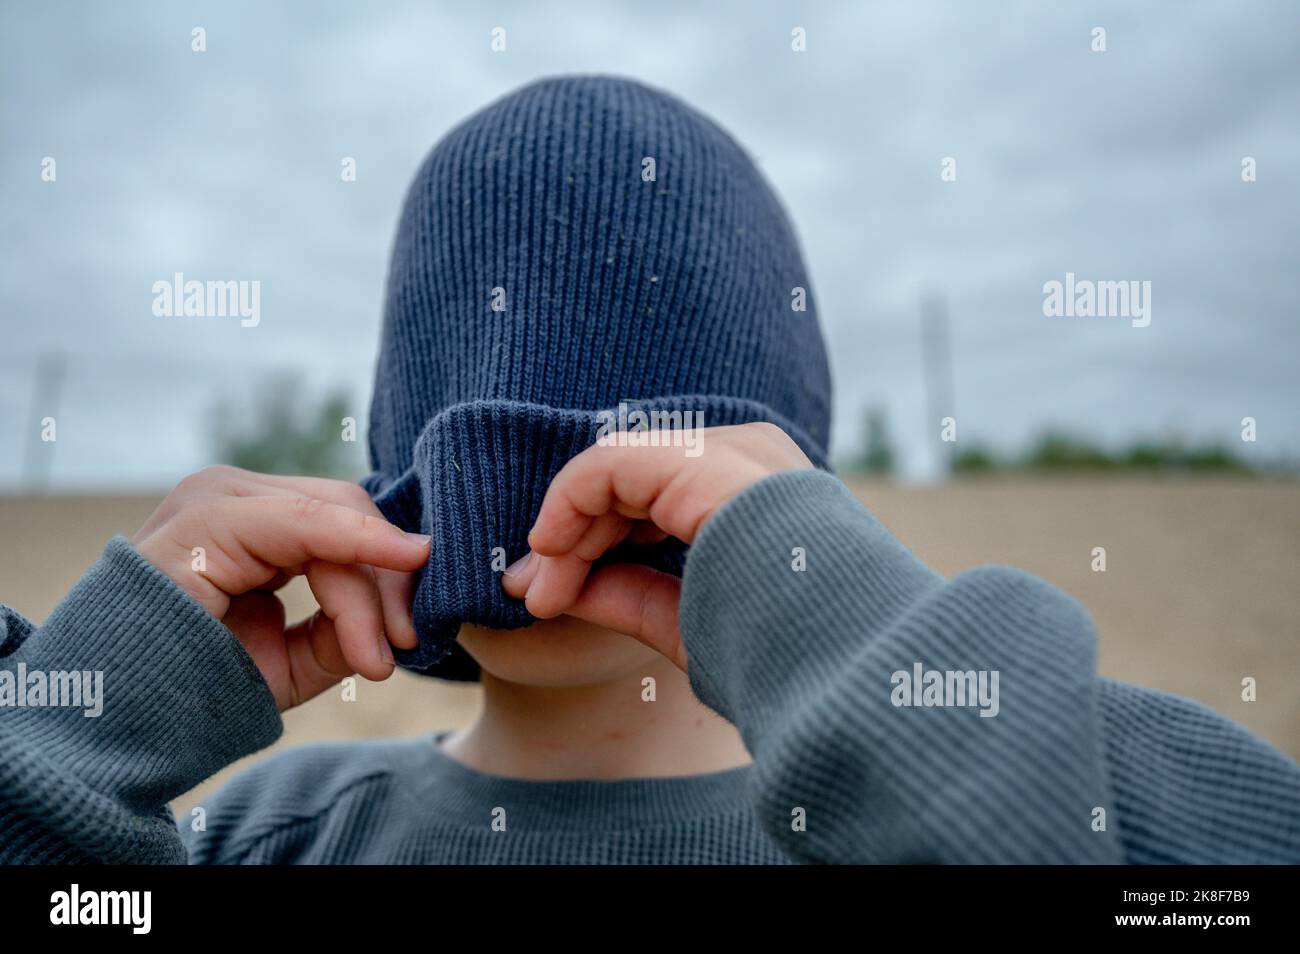 Playful boy covering face with knit hat Stock Photo